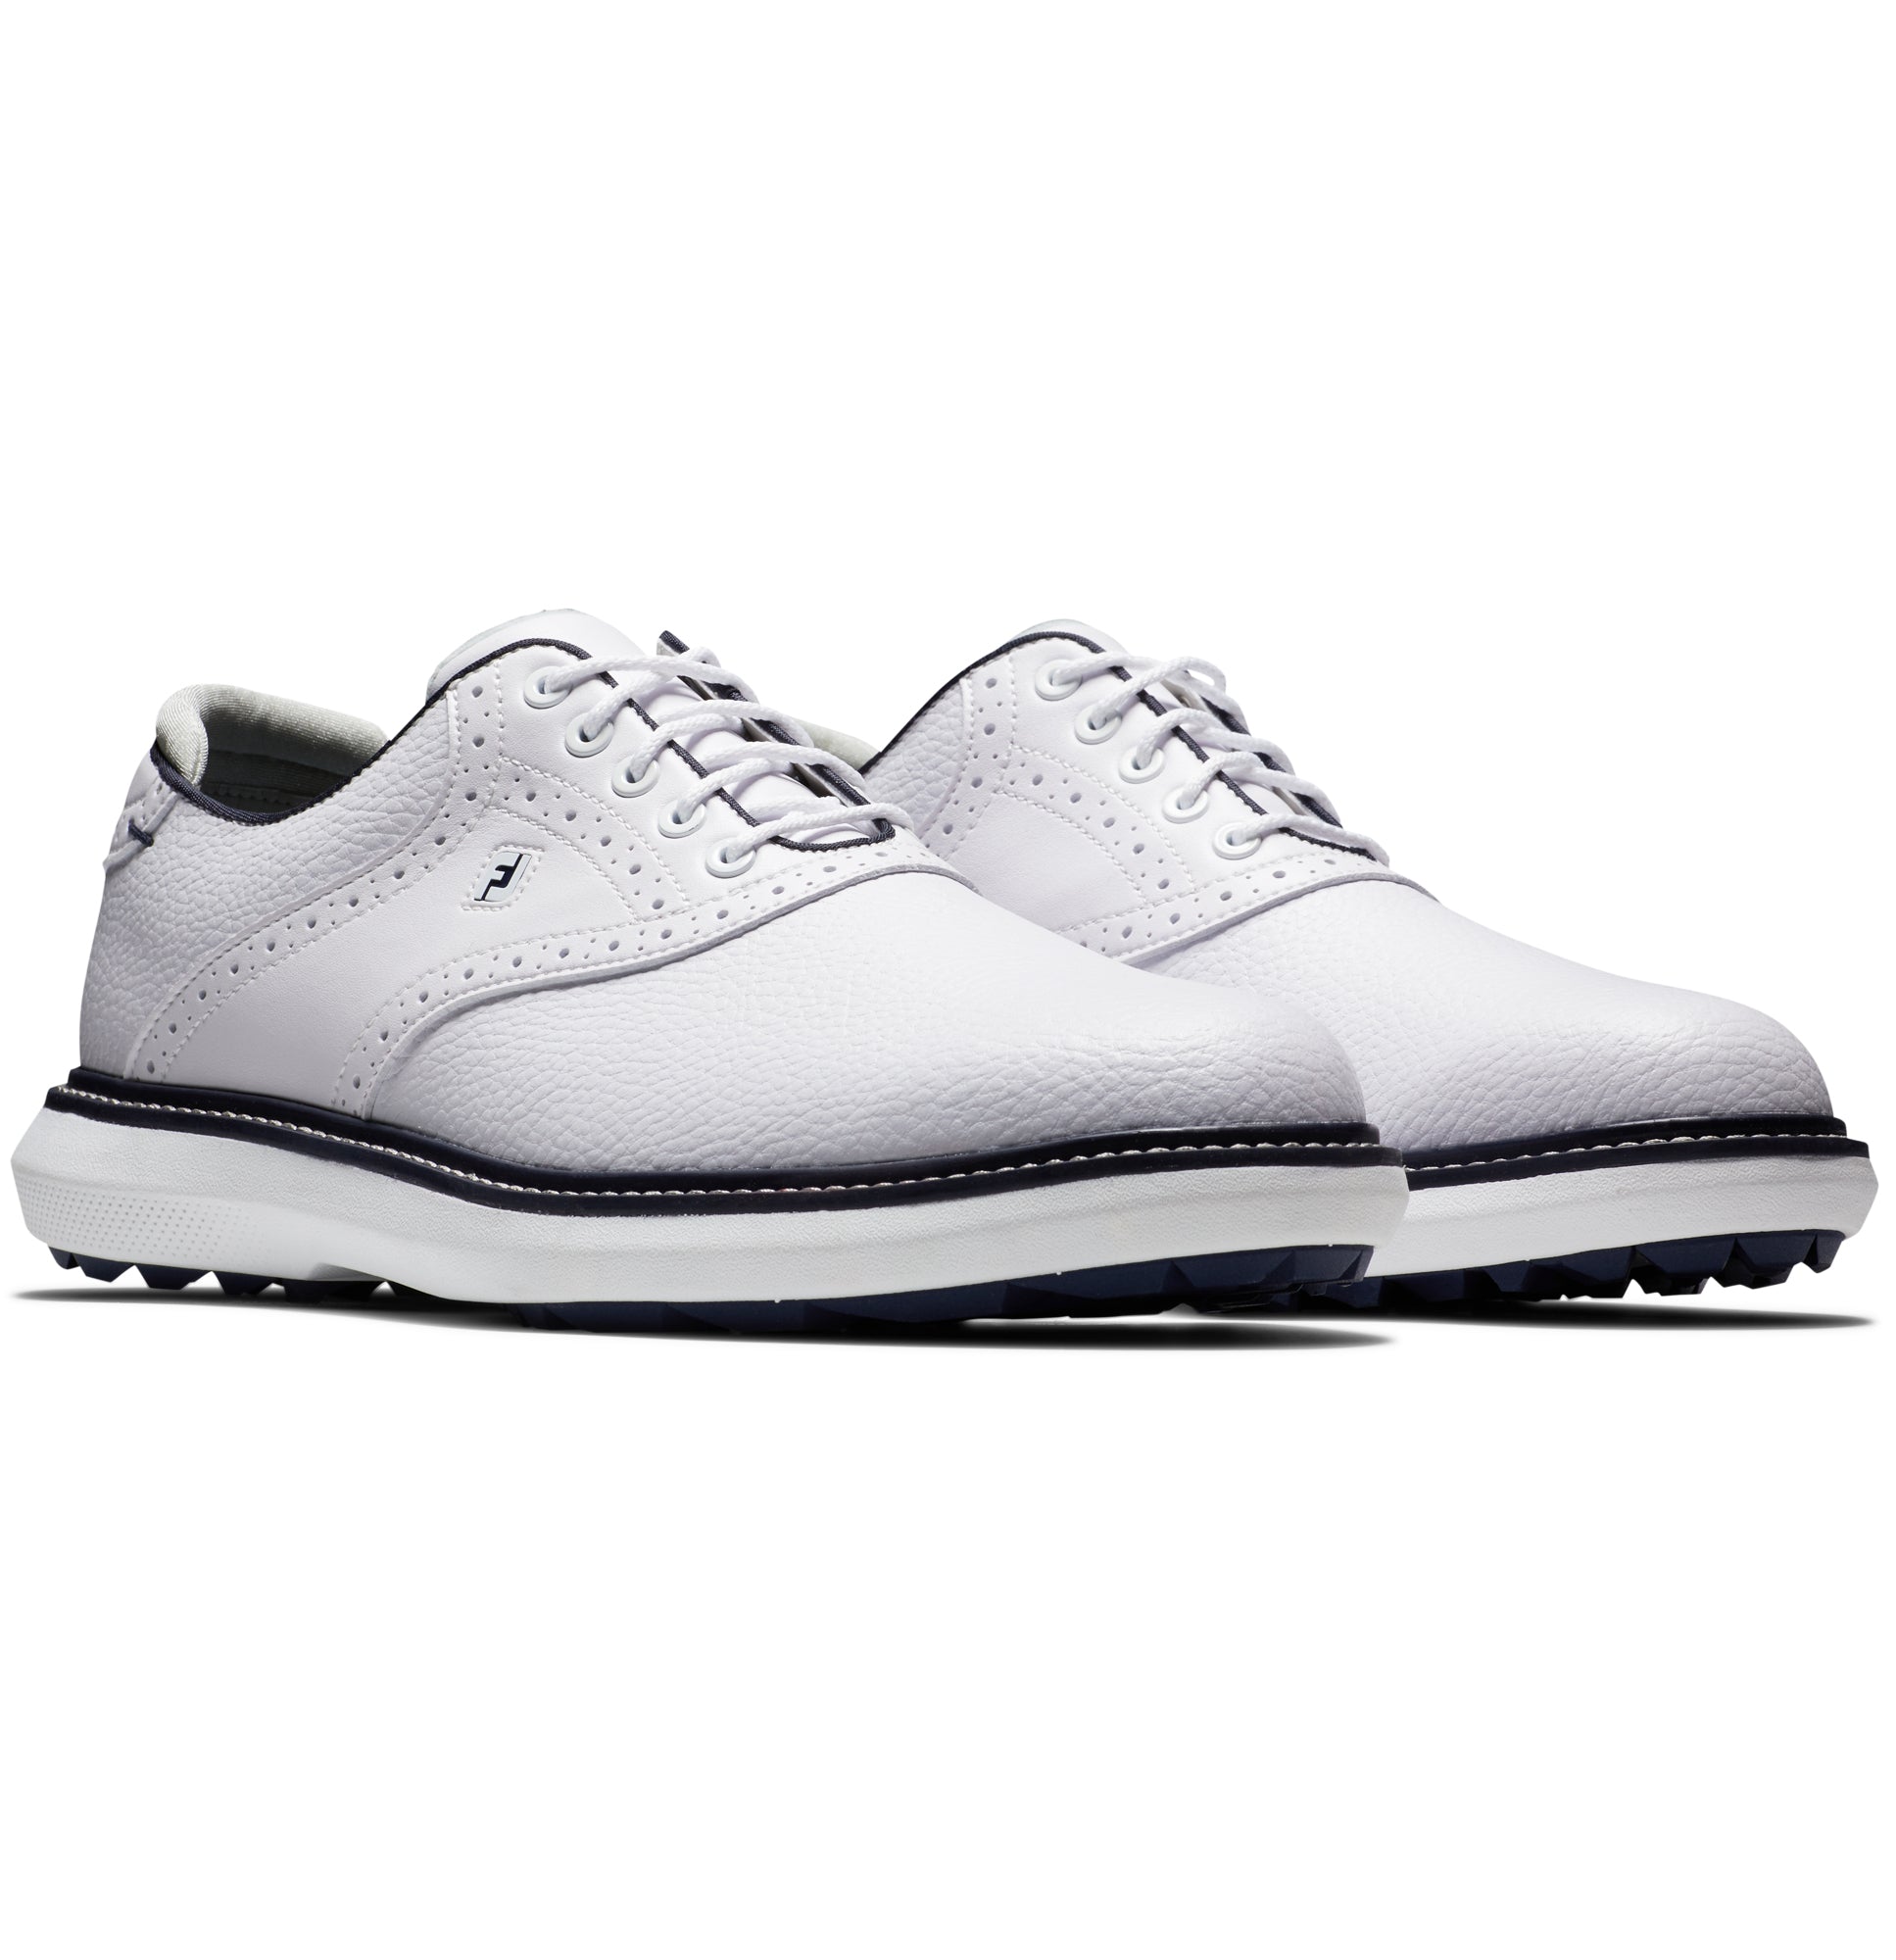 footjoy-fj-traditions-spikeless-golf-shoes-57927-white-navy